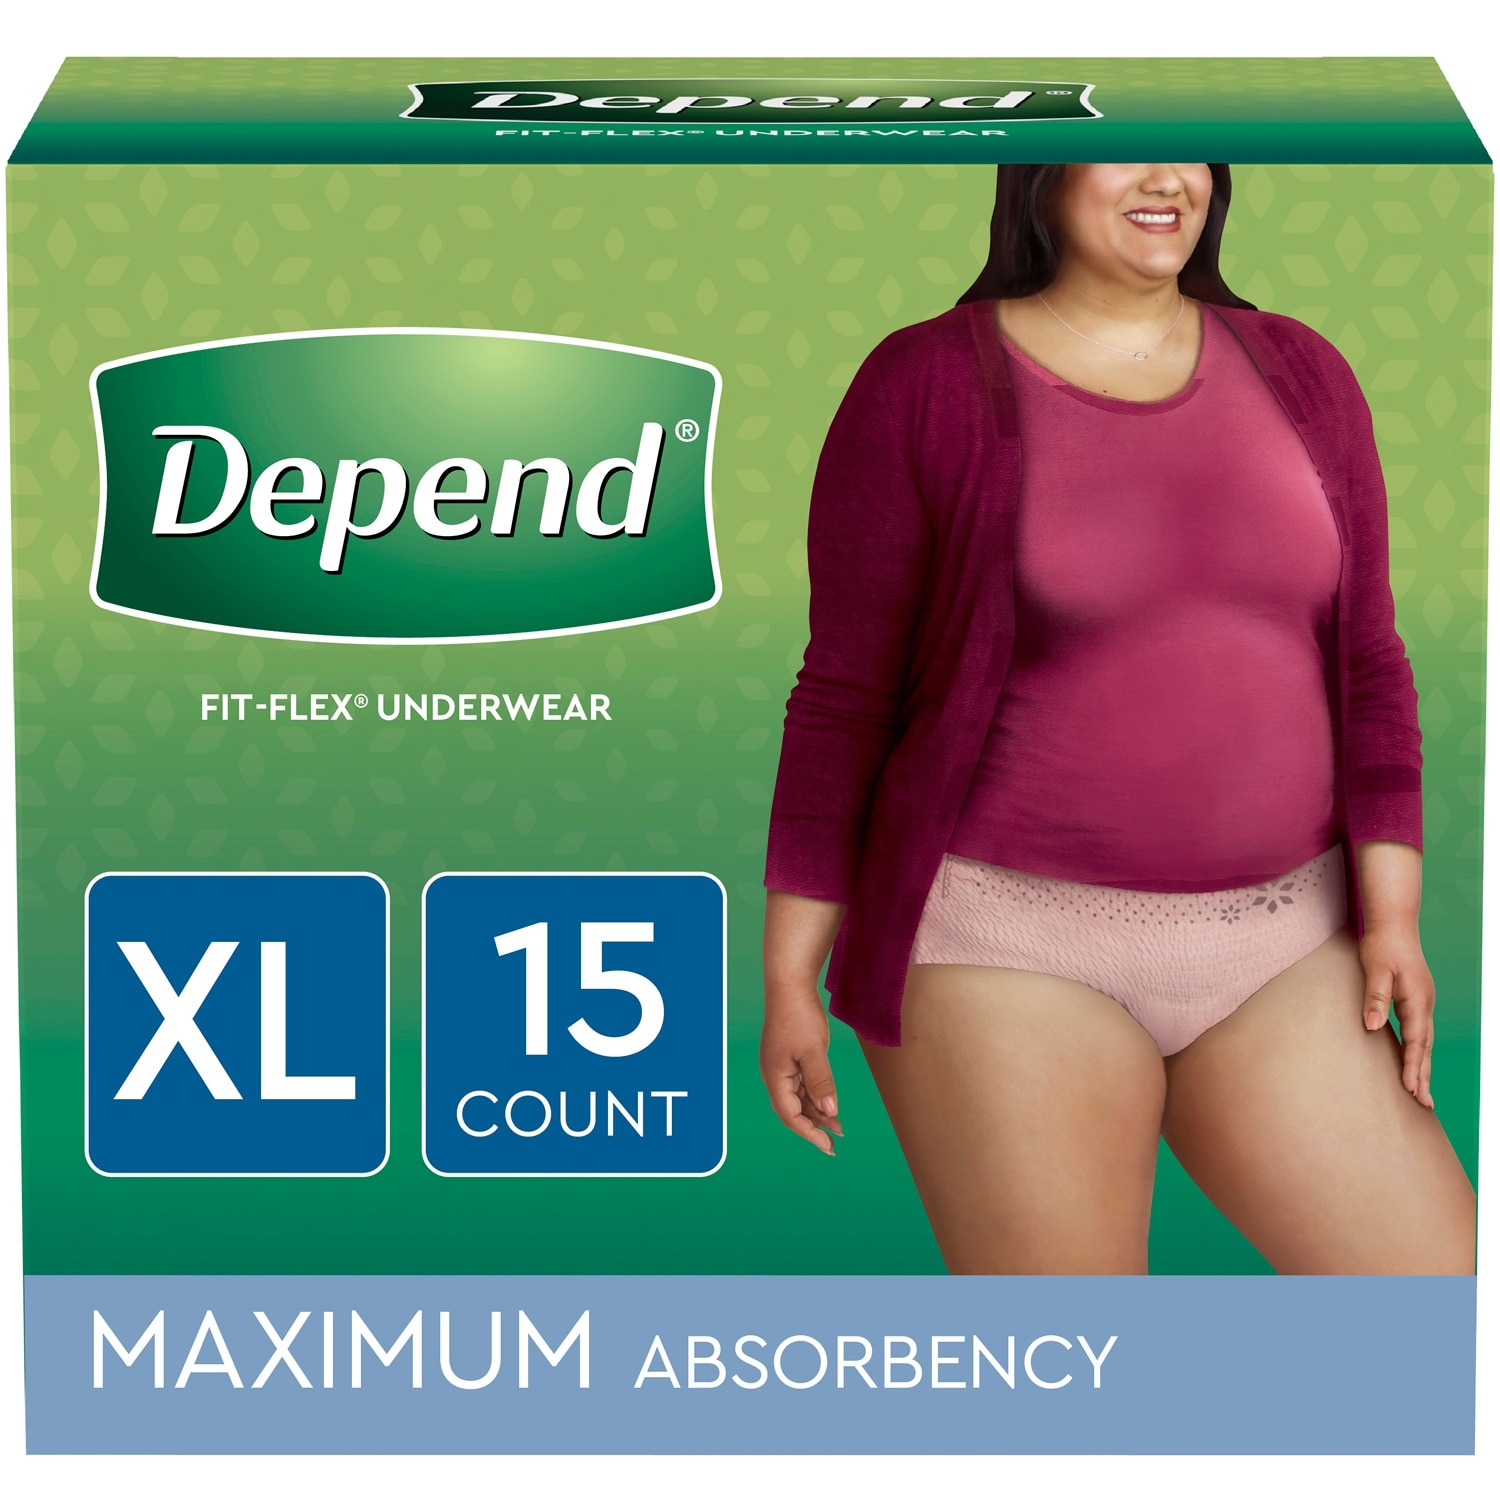 Always Discreet, Incontinence & Postpartum Underwear For Women, Classic  Cut, Size Extra-Large, Maximum Absorbency, Disposable, 15 Count 